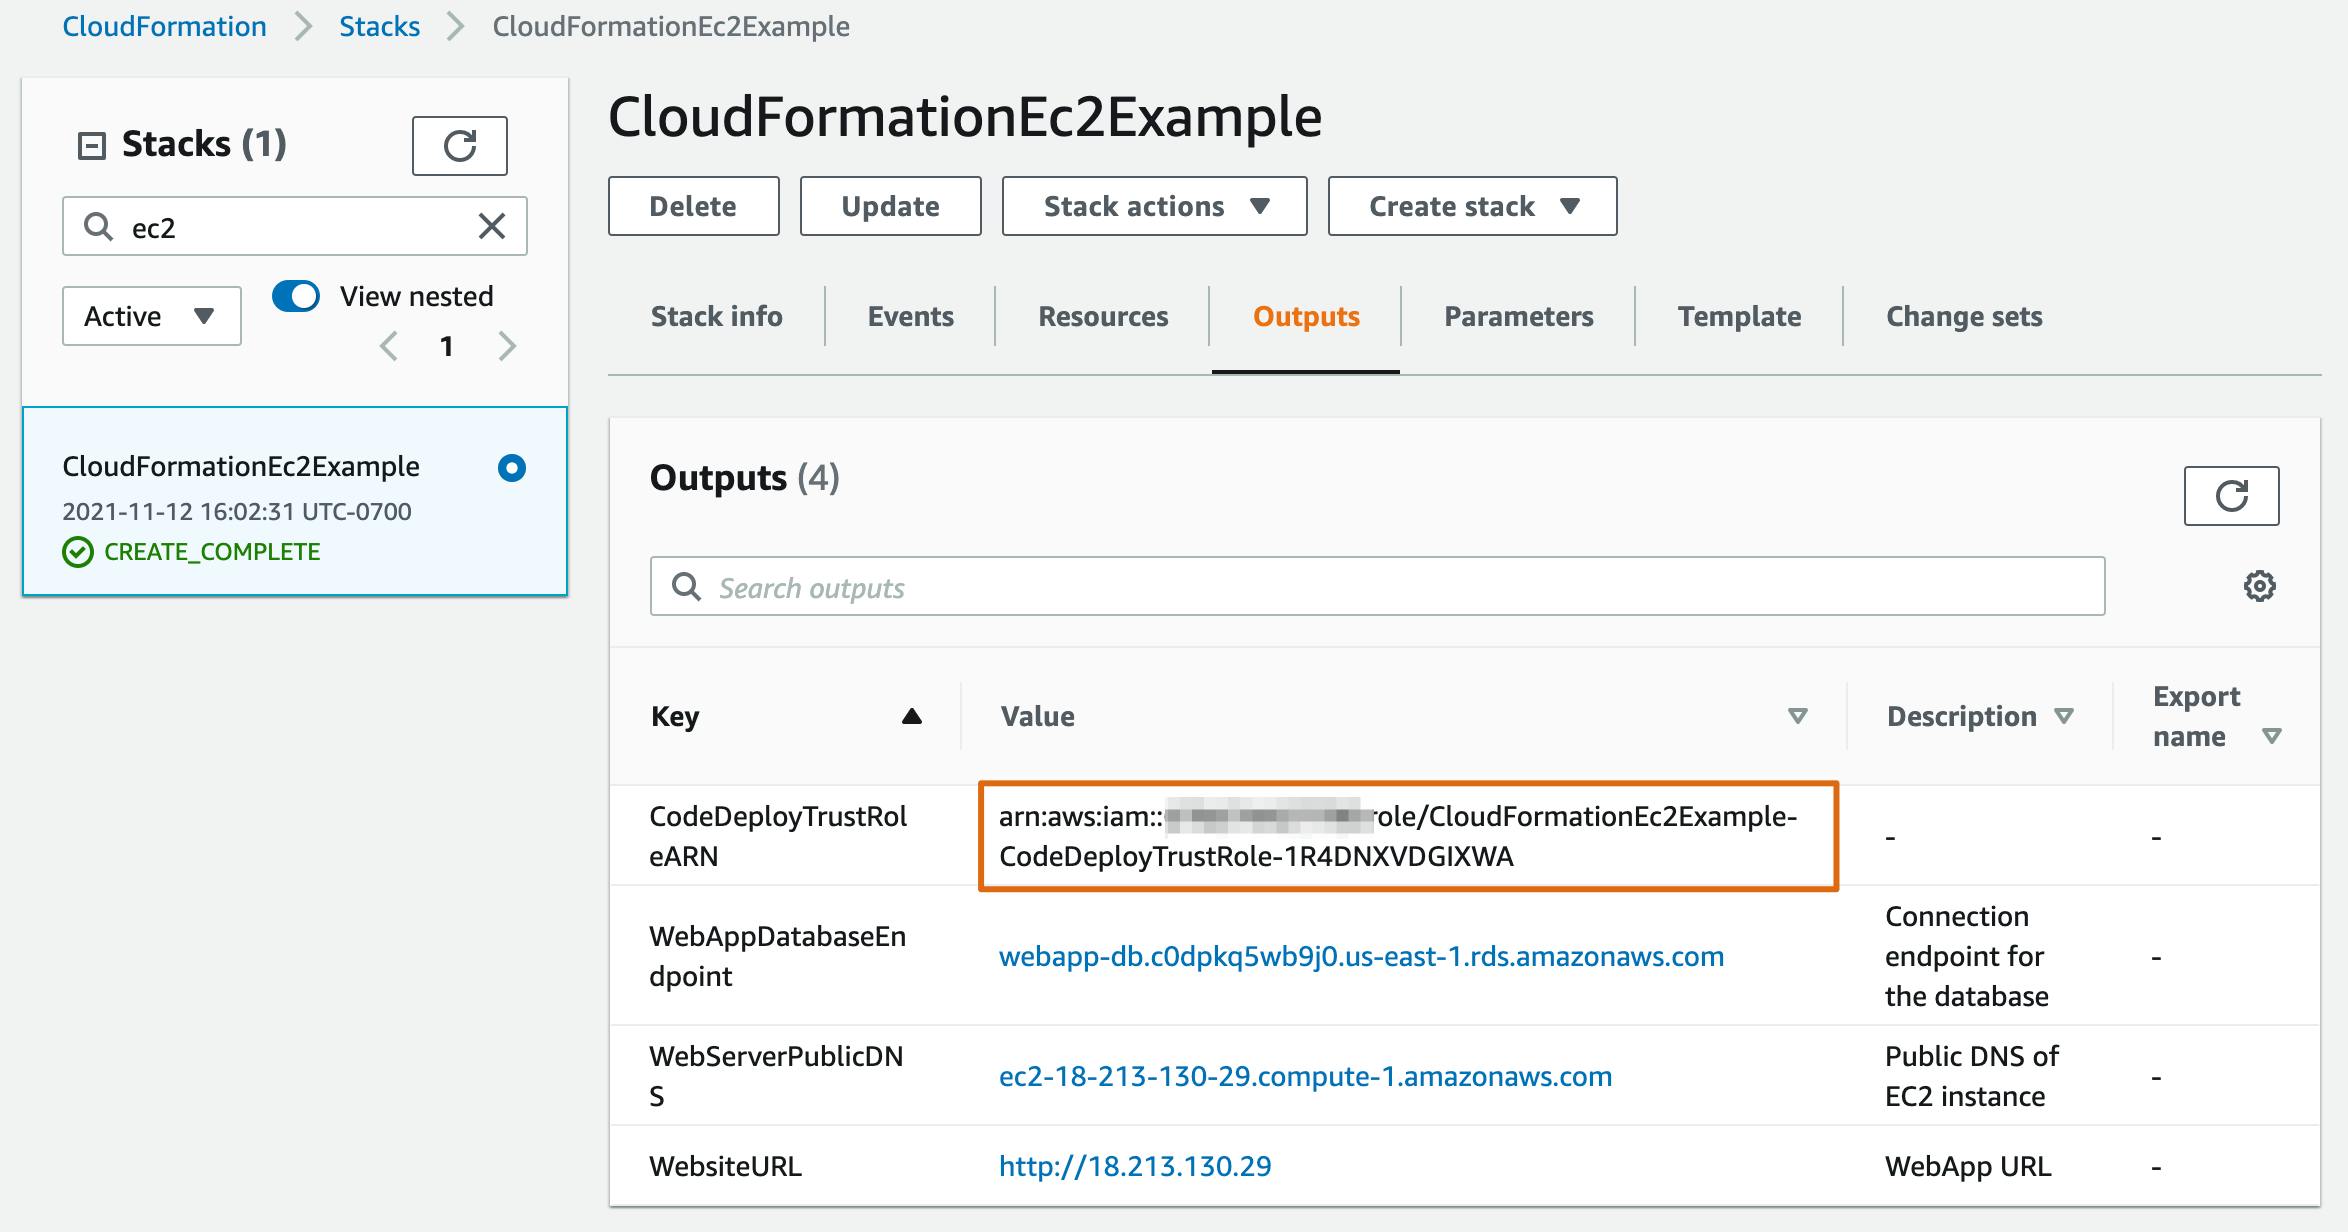 CloudFormation Stack Outputs tab in the AWS Console